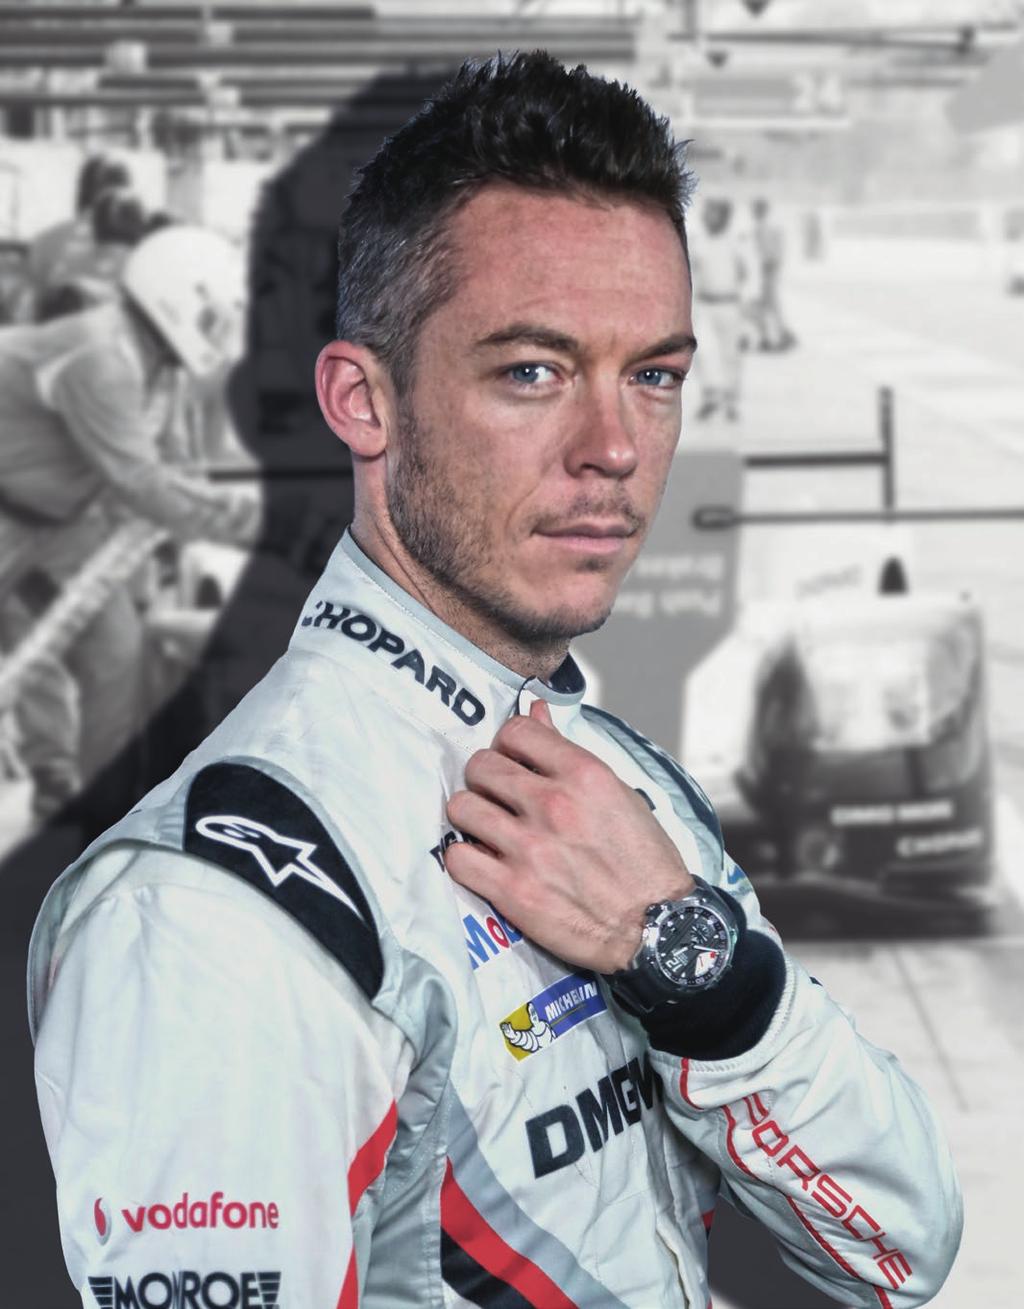 Superfast & Porsche Motorsport 37 ANDRÉ LOTTERER 919 HYBRID NO.1 Nationality German Date of Birth November 19 th 1981 Place of Birth Duisburg, Germany Height/Weight 1.